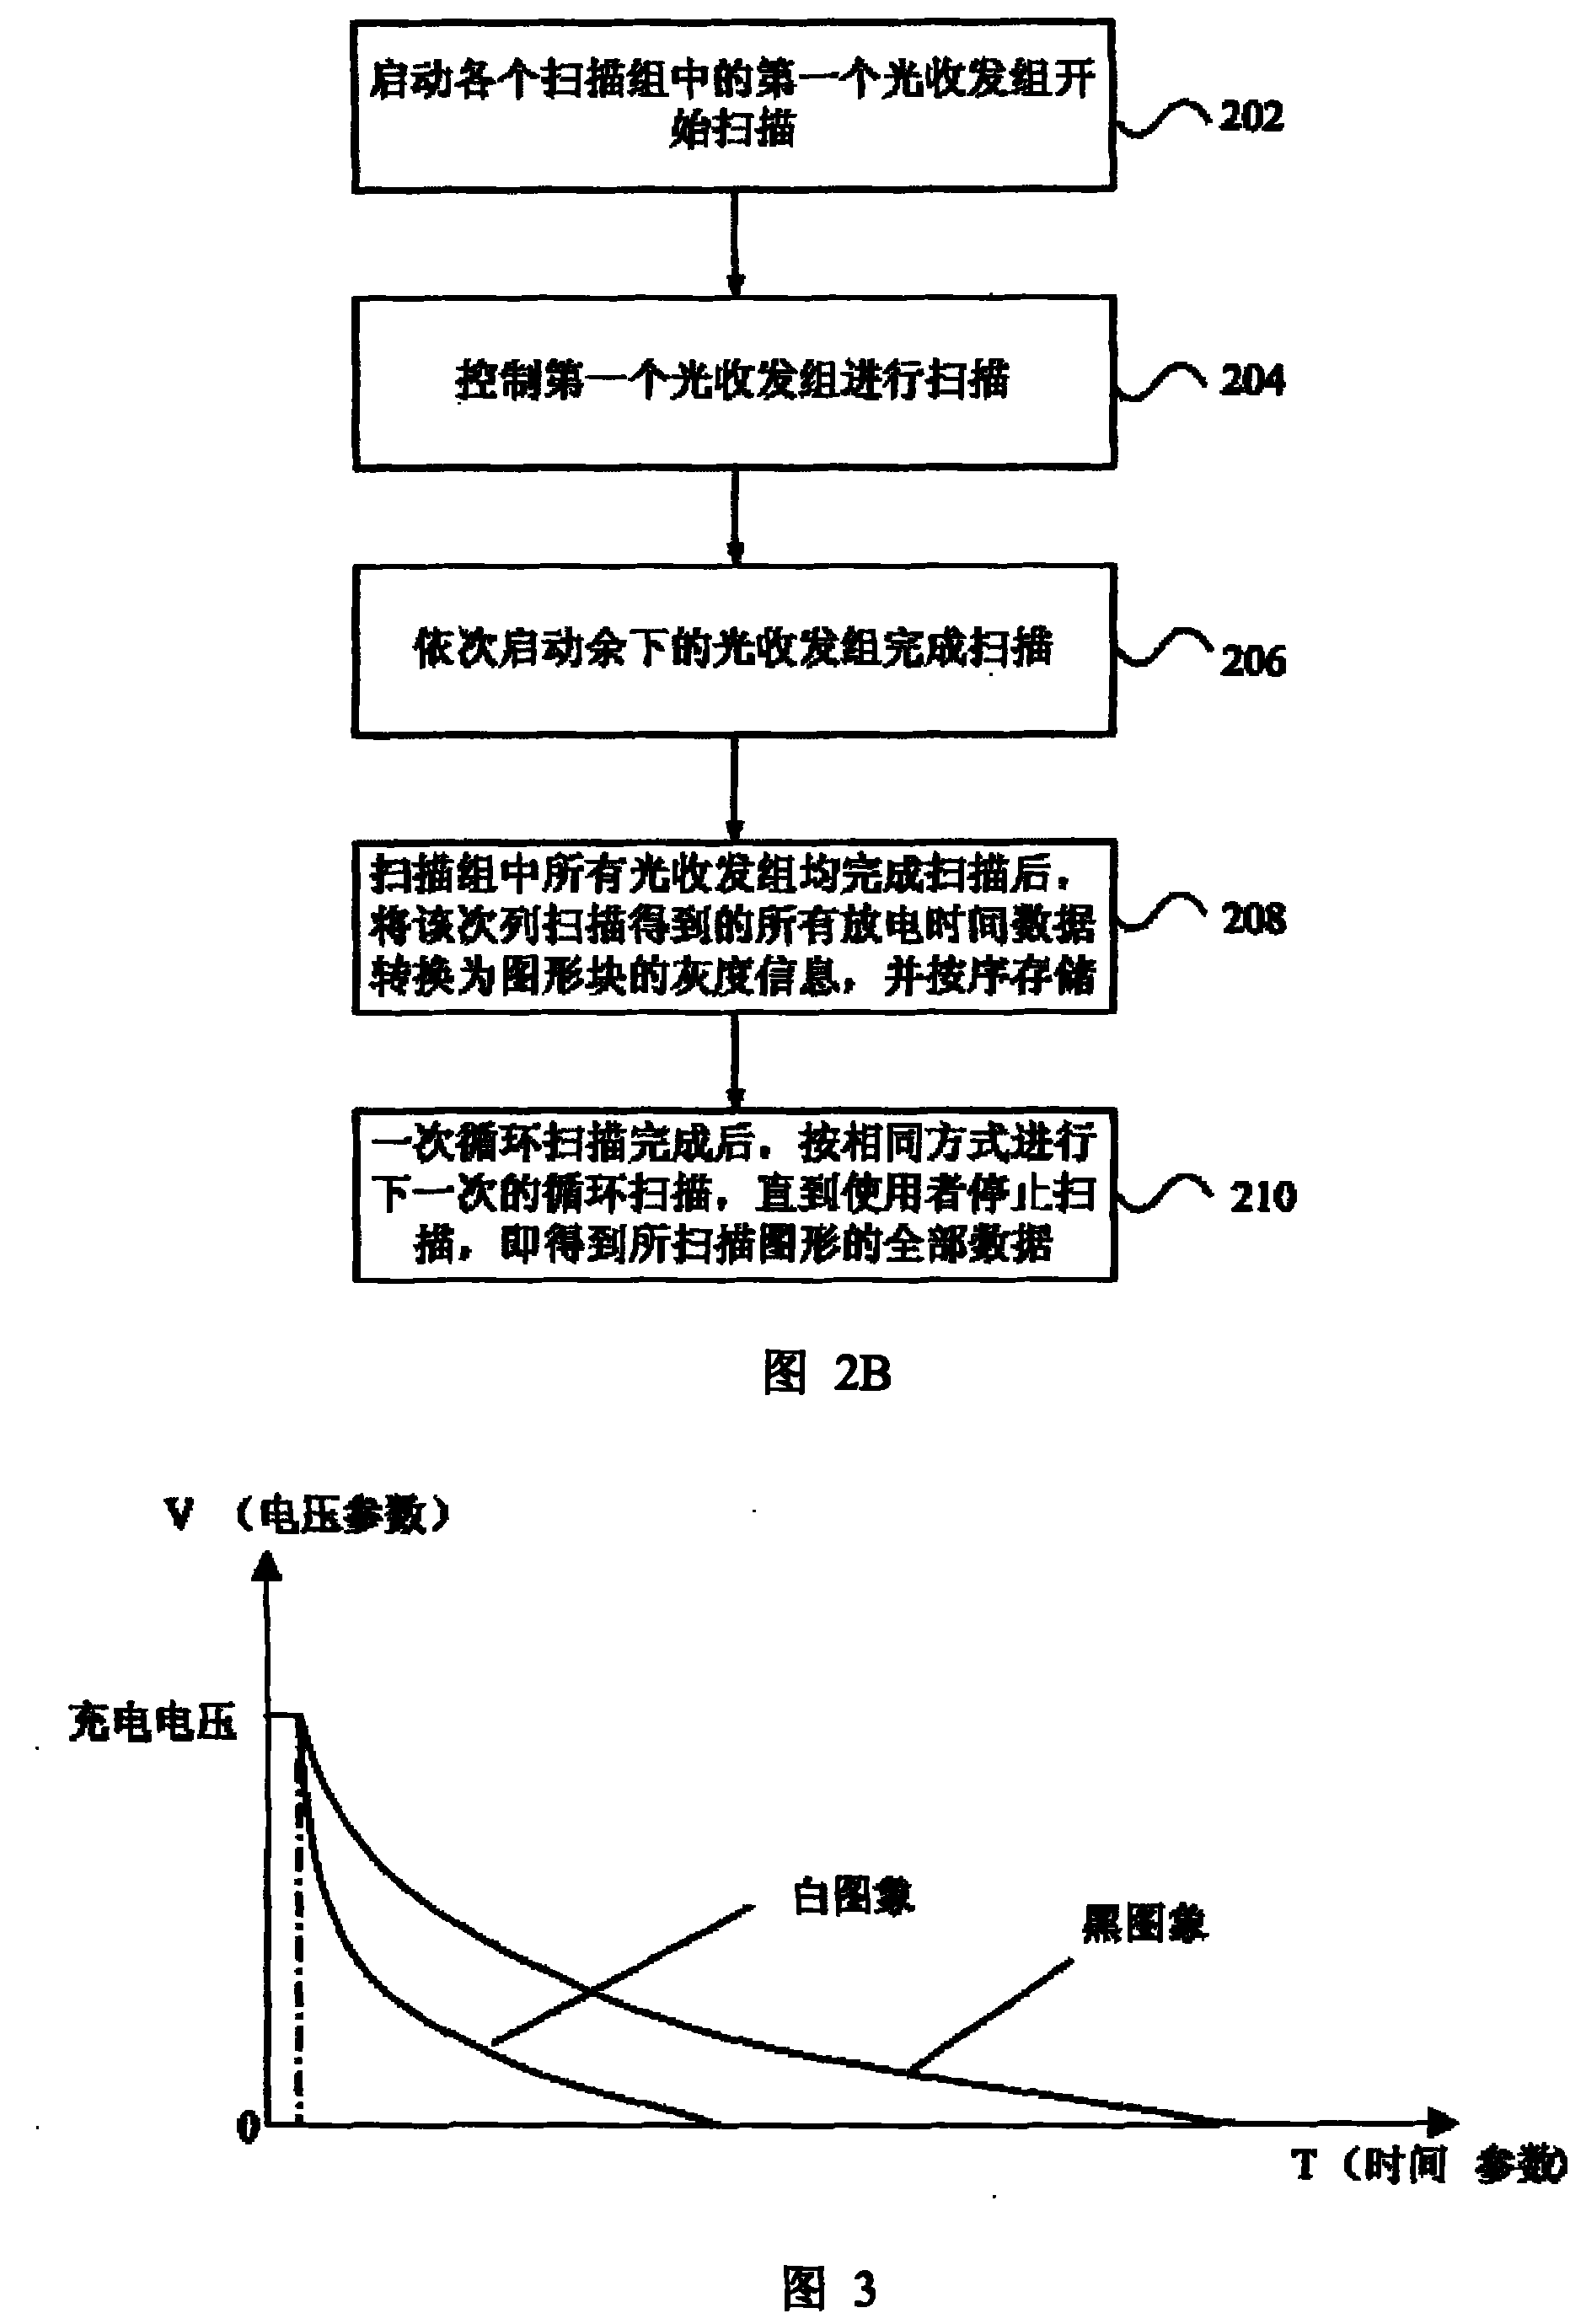 A device and scanning method based on LED array scanning pattern